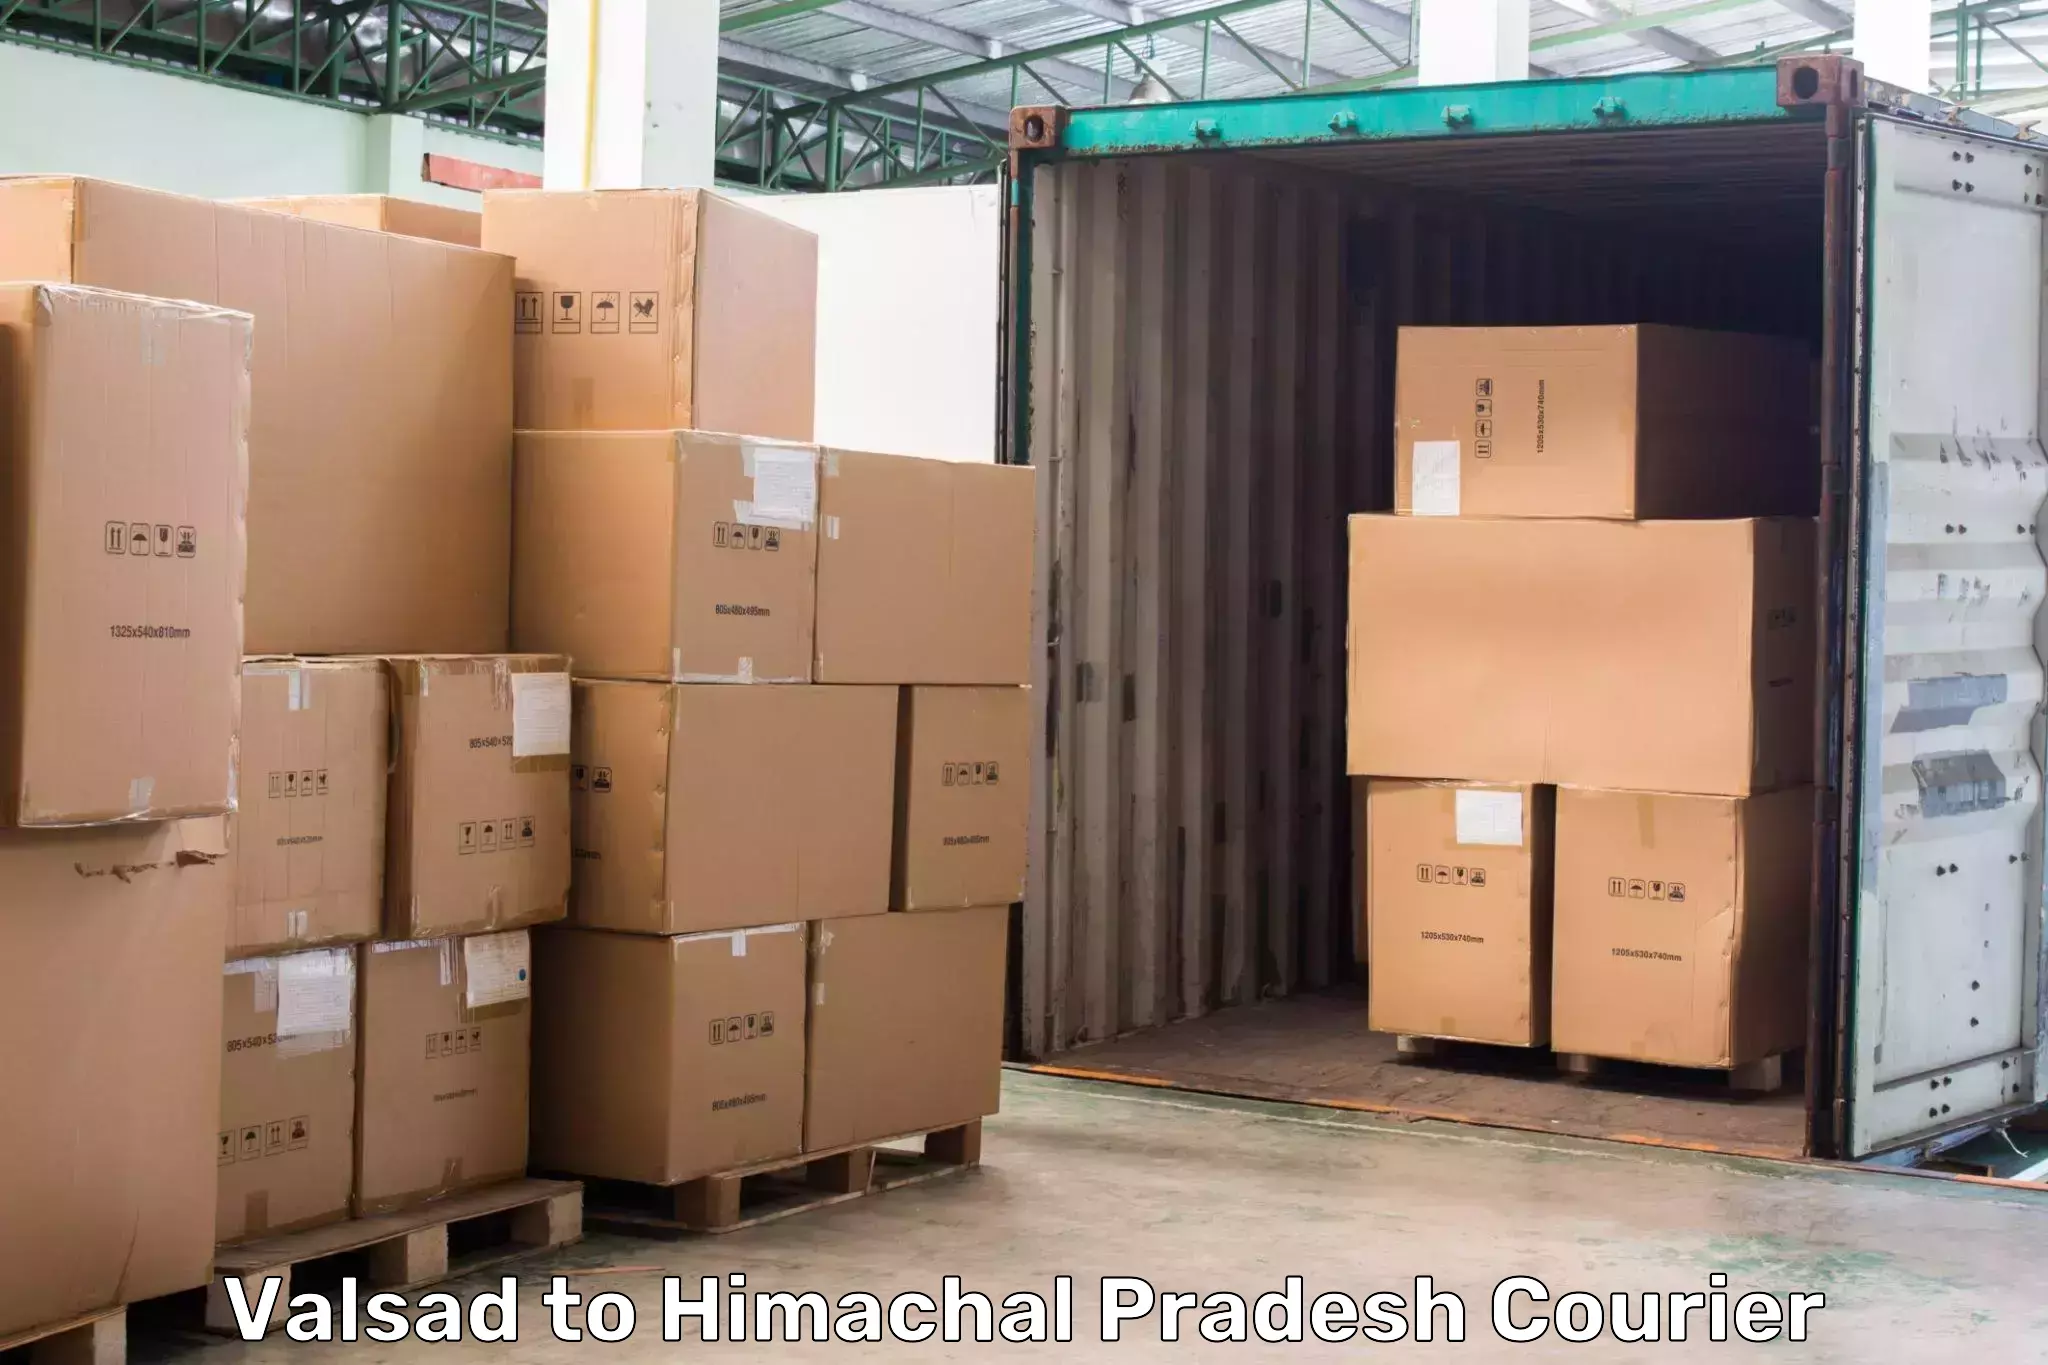 Express delivery capabilities Valsad to Dharamshala